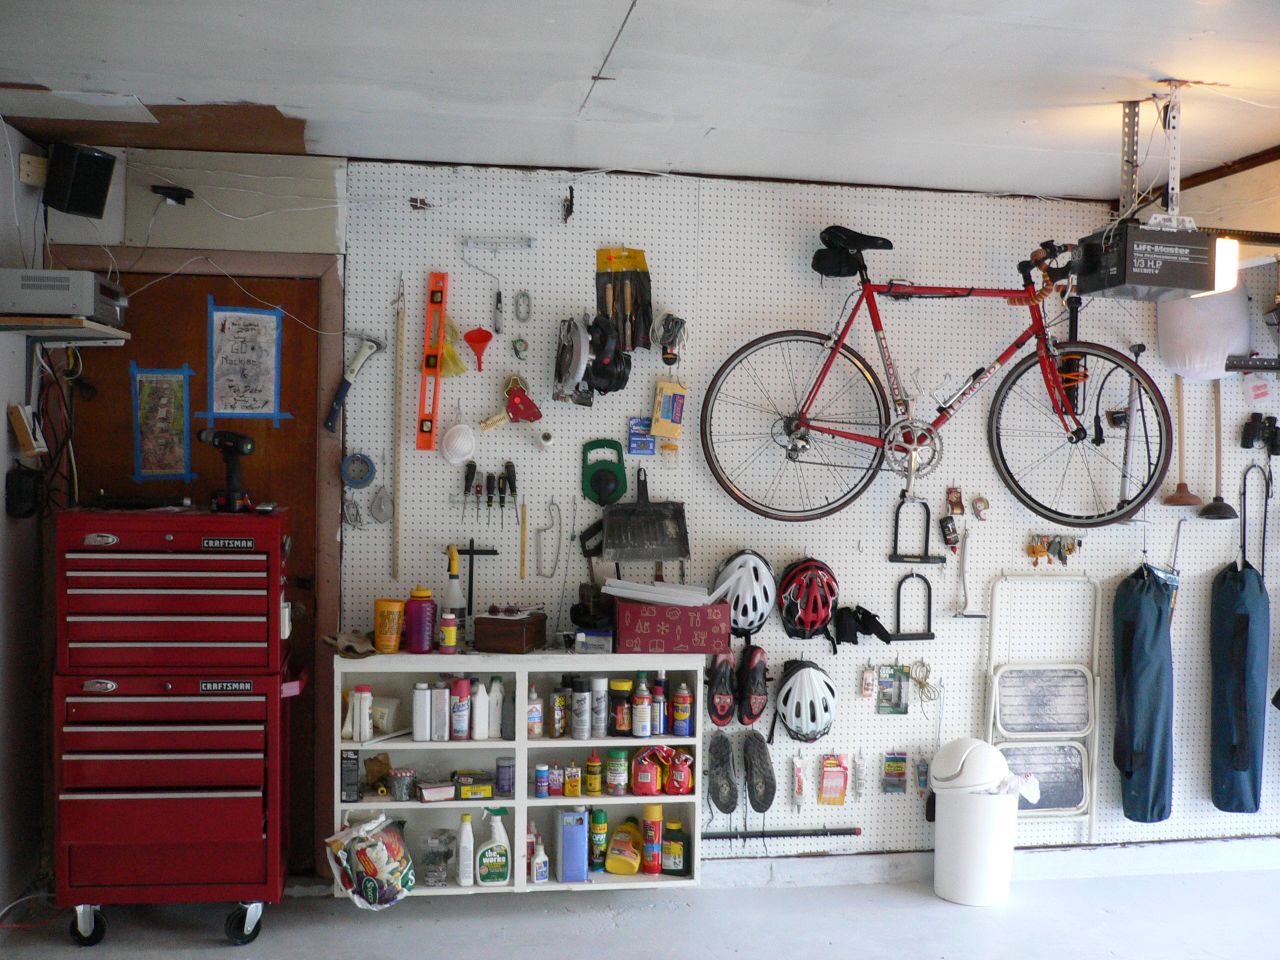 Invest in Smart Storage for Your Garage